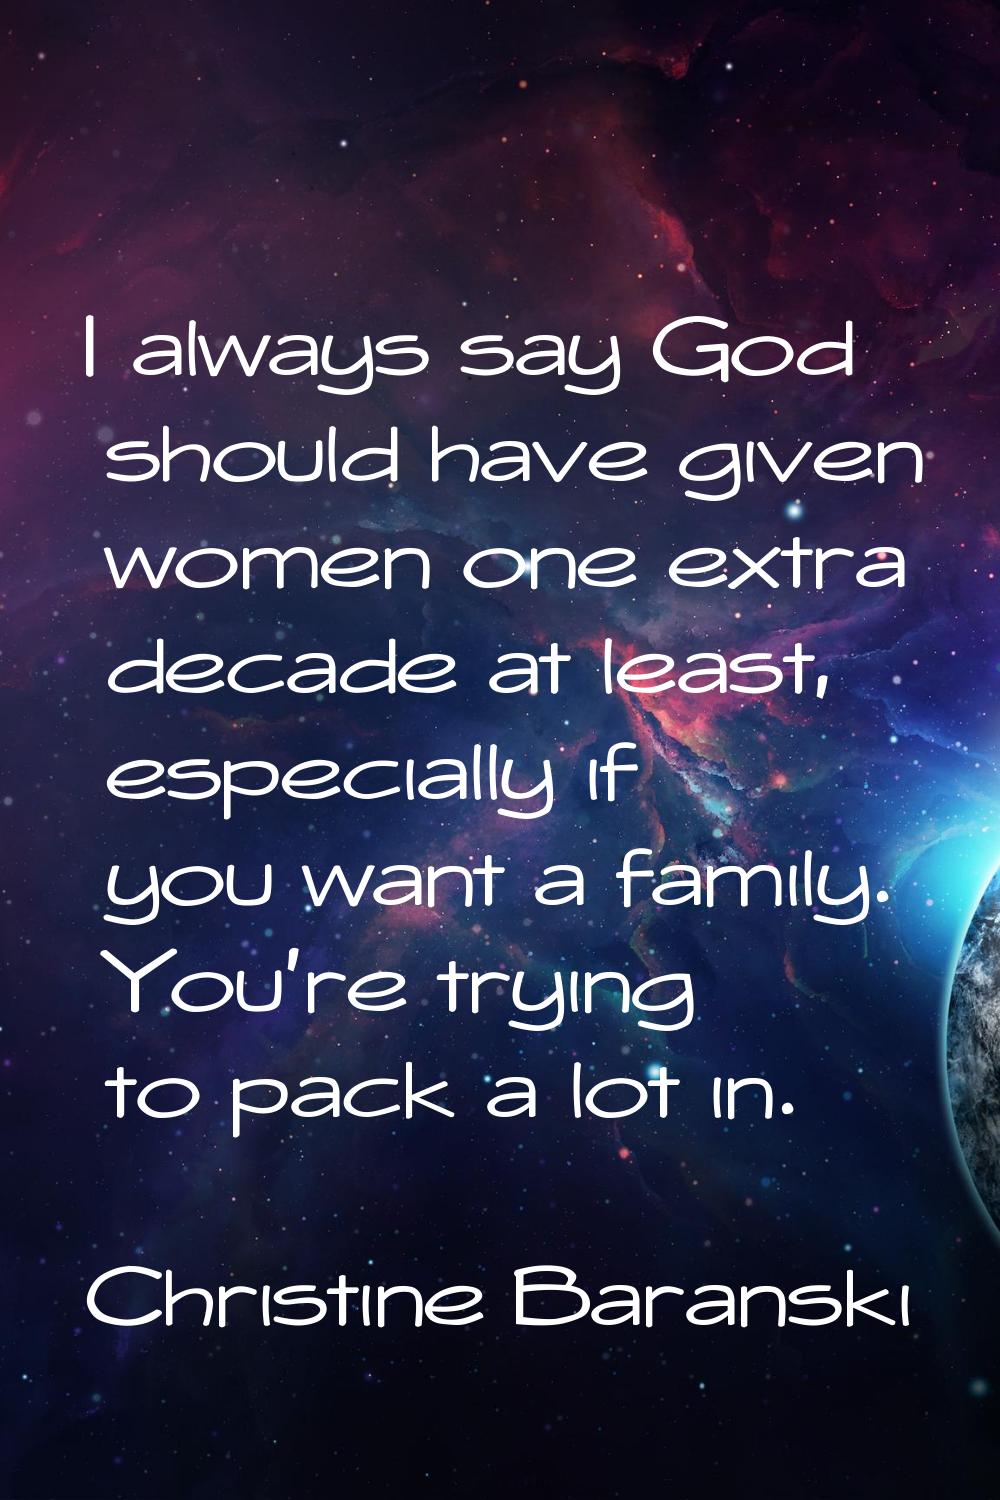 I always say God should have given women one extra decade at least, especially if you want a family